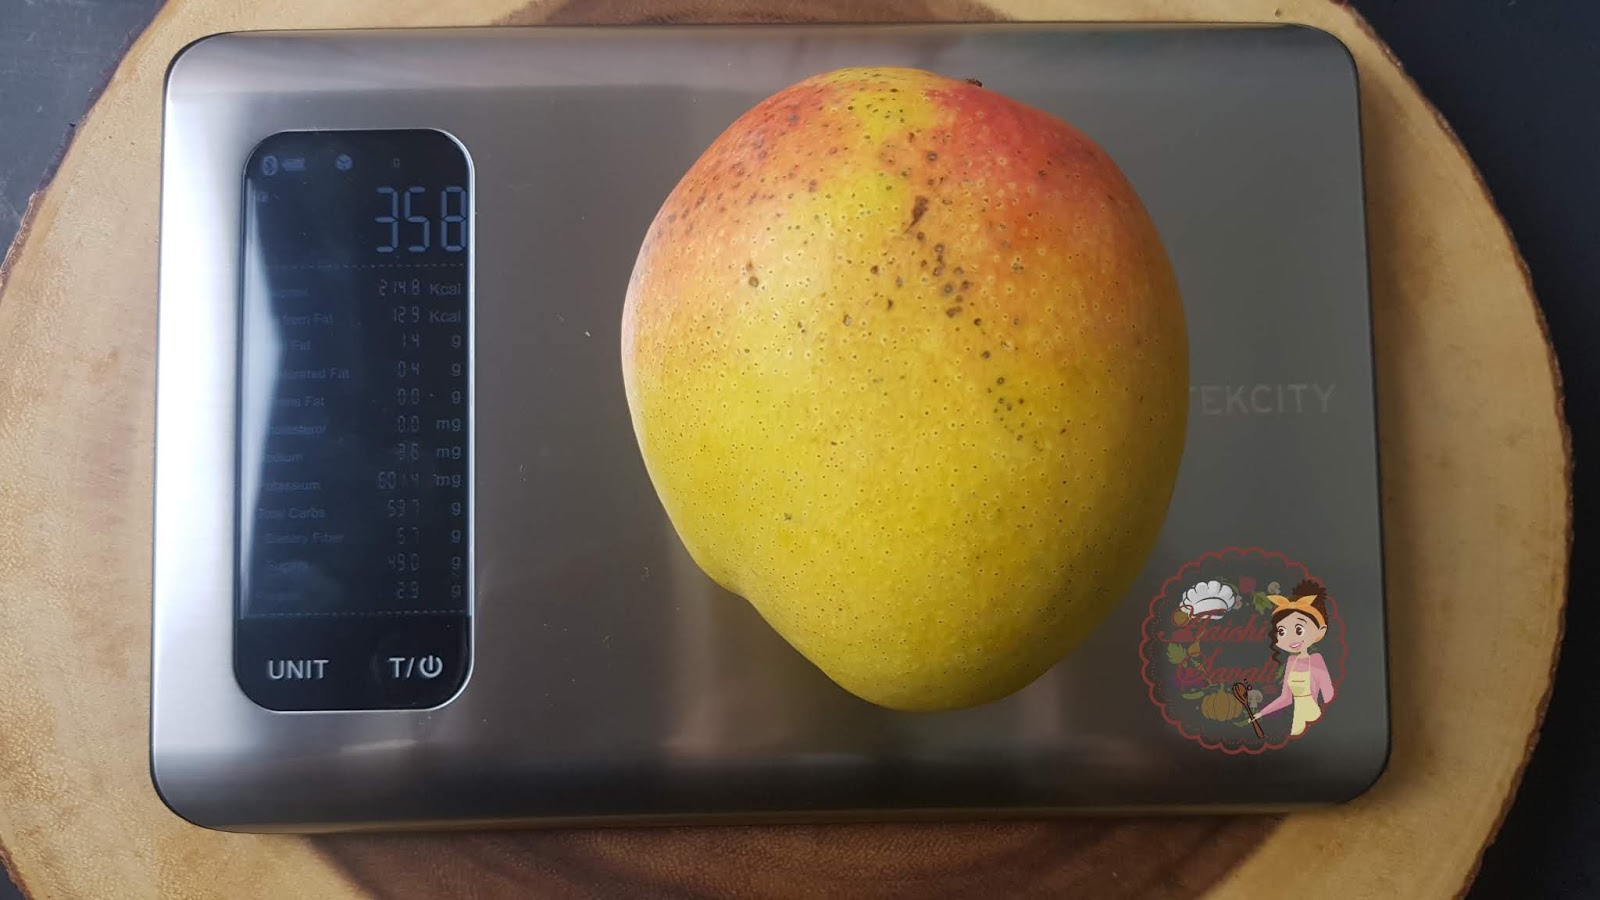 Etekcity Smart Food Nutrition Scale: The Best Way To Keep Track Of Your  Diet! 